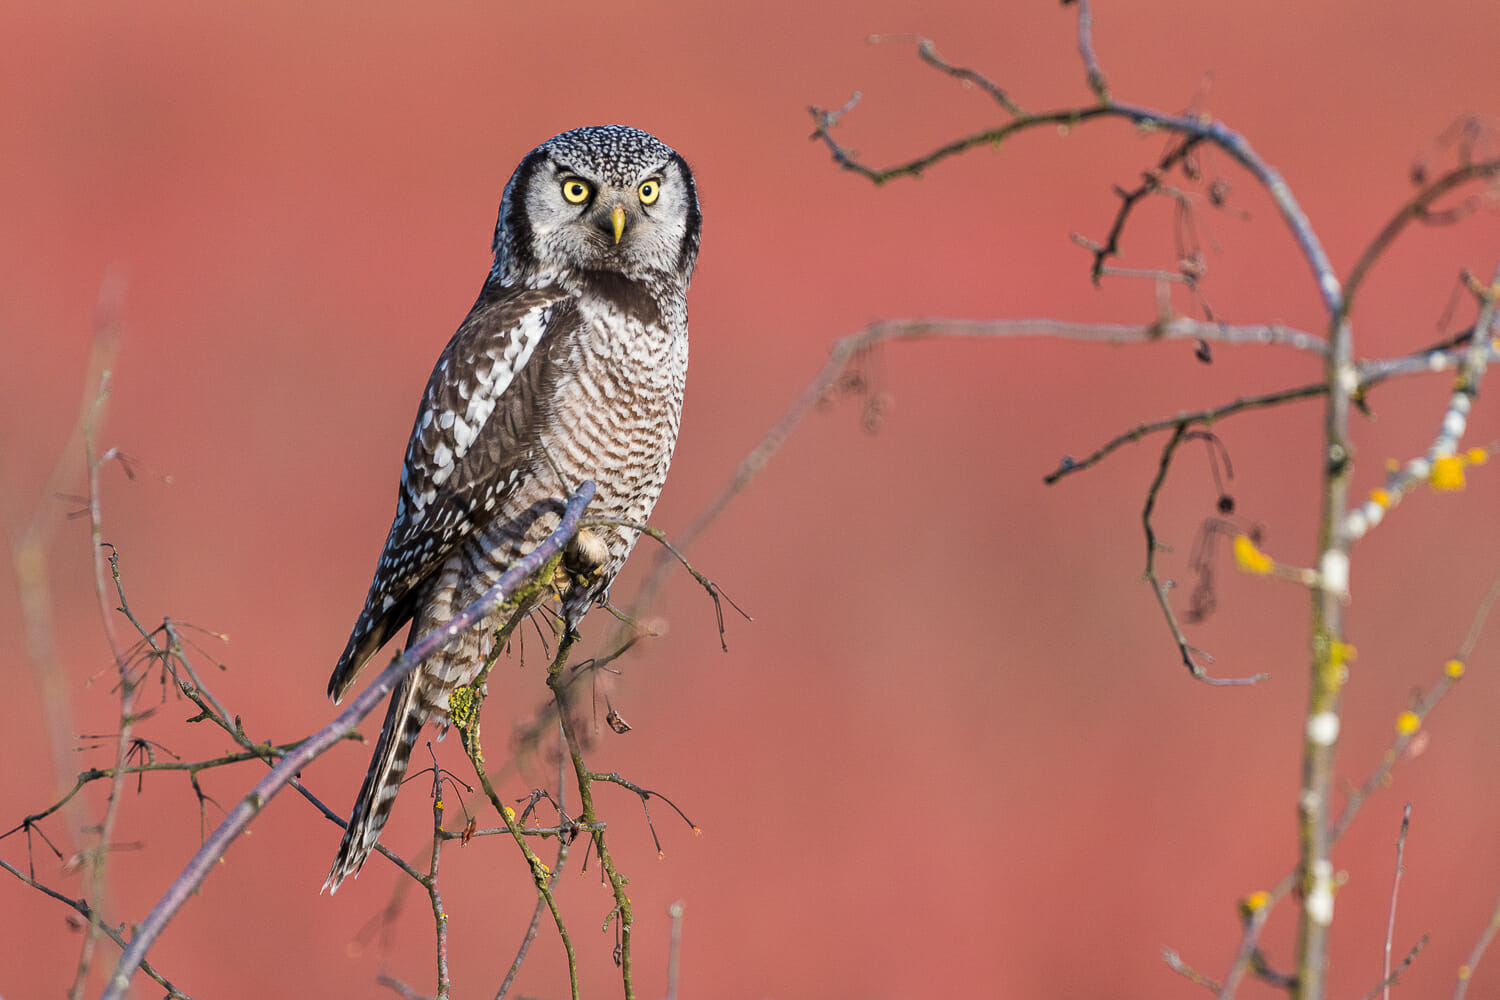 An owl perched on a thin branch against a red background.